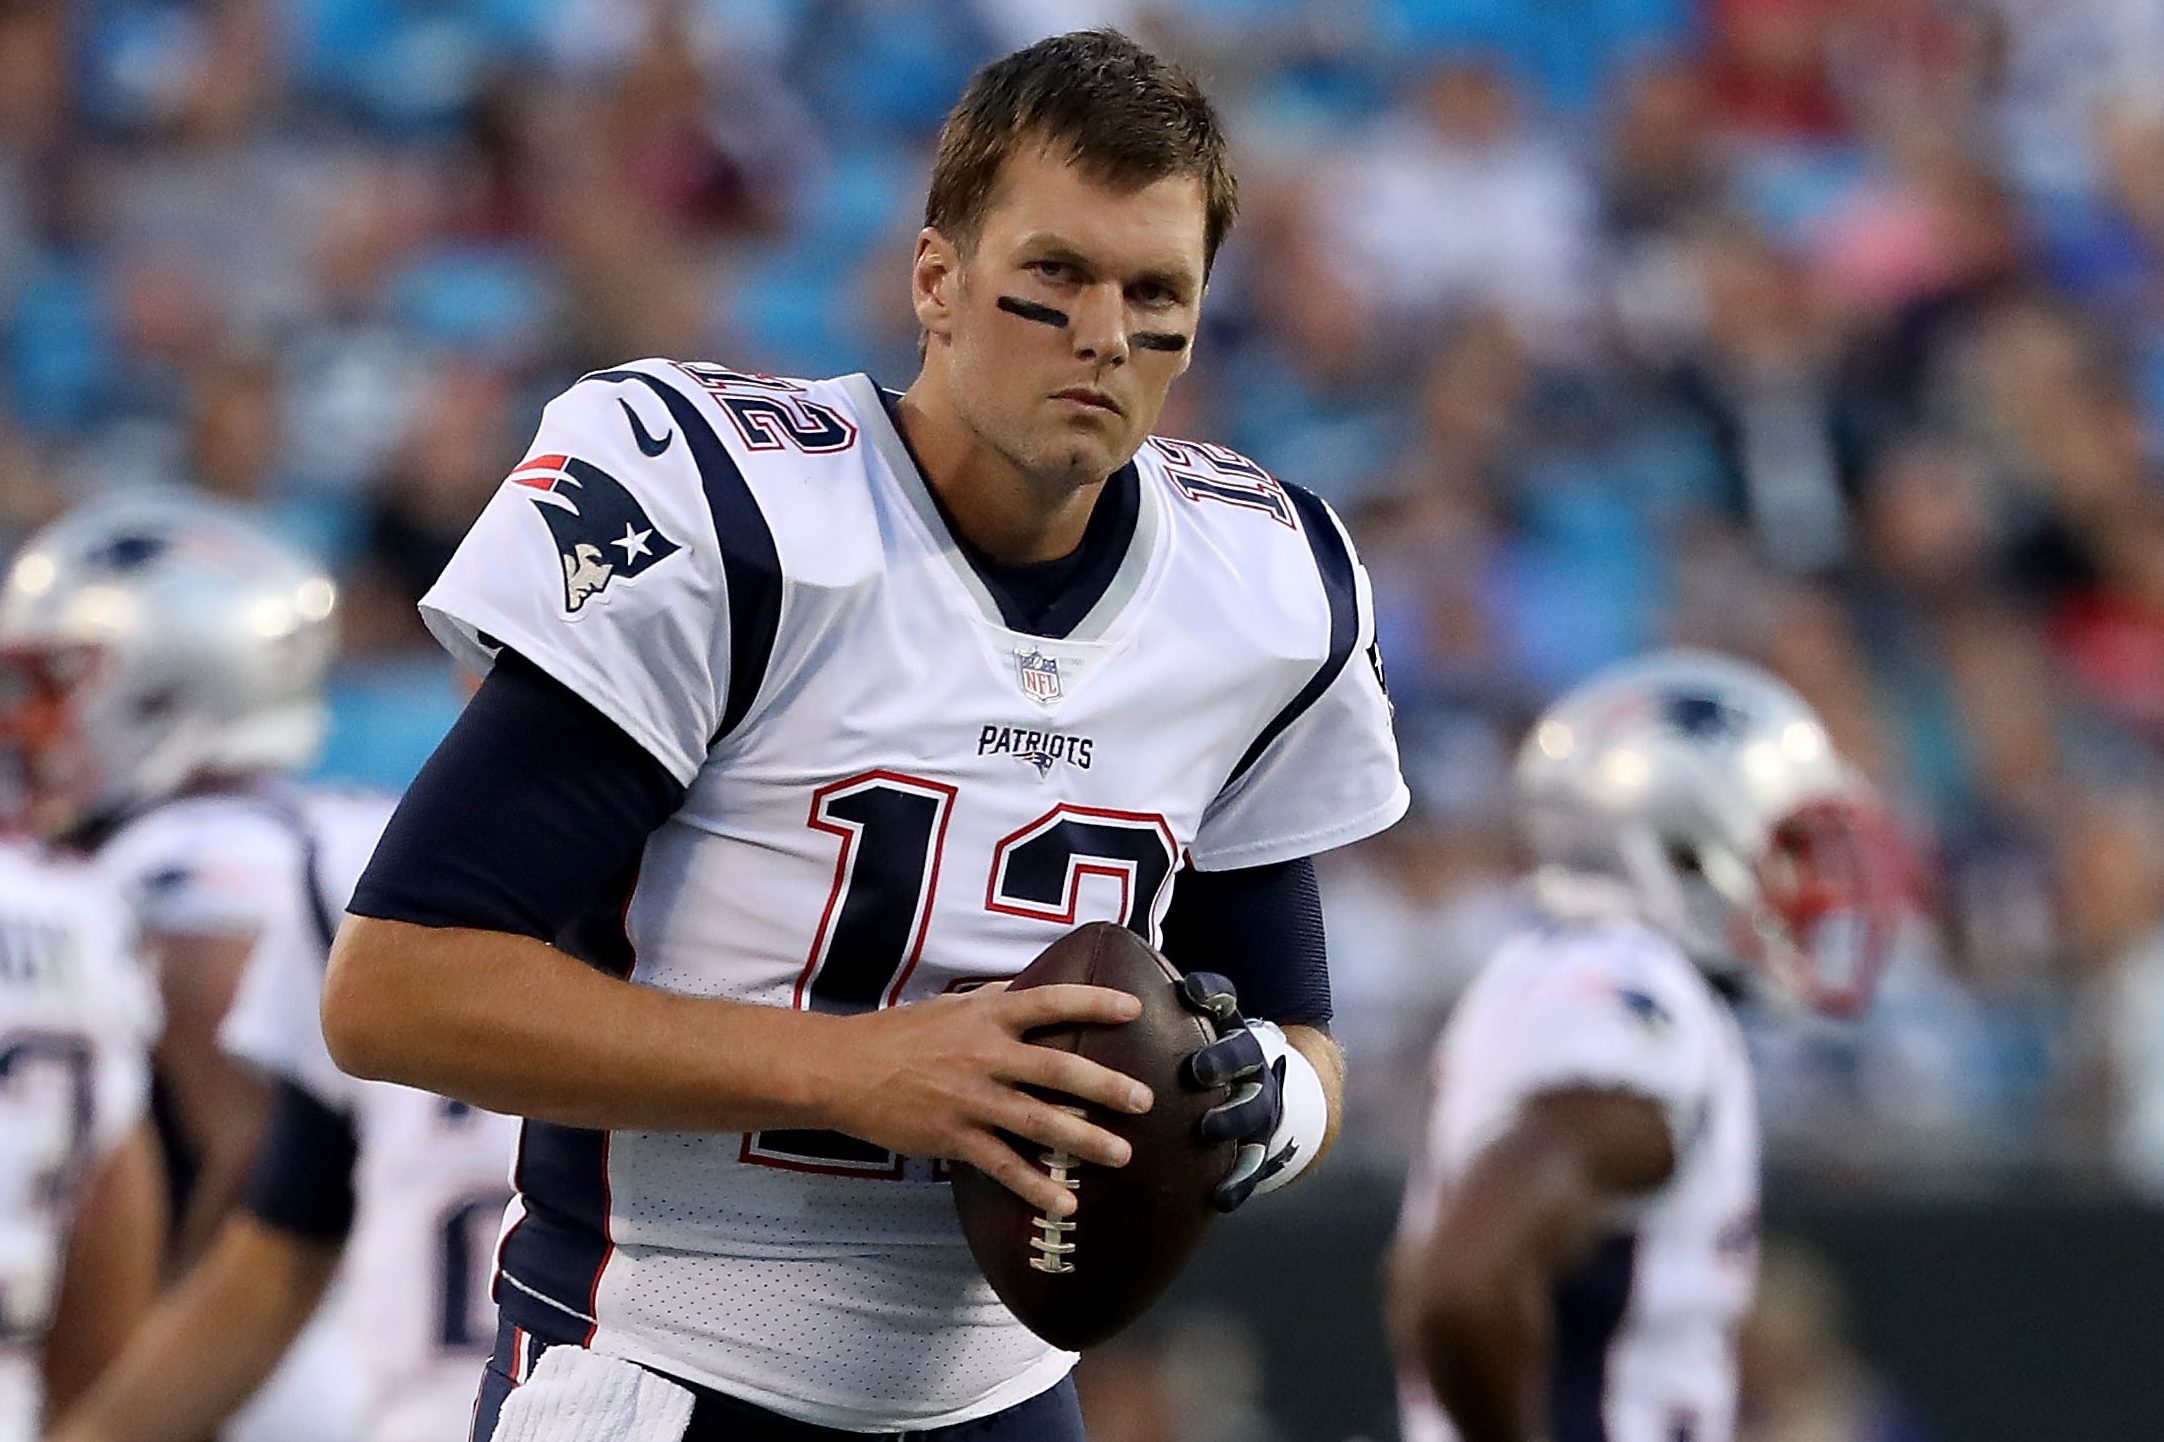 Tom Brady #12 of the New England Patriots. (Photo by Streeter Lecka/Getty Images)